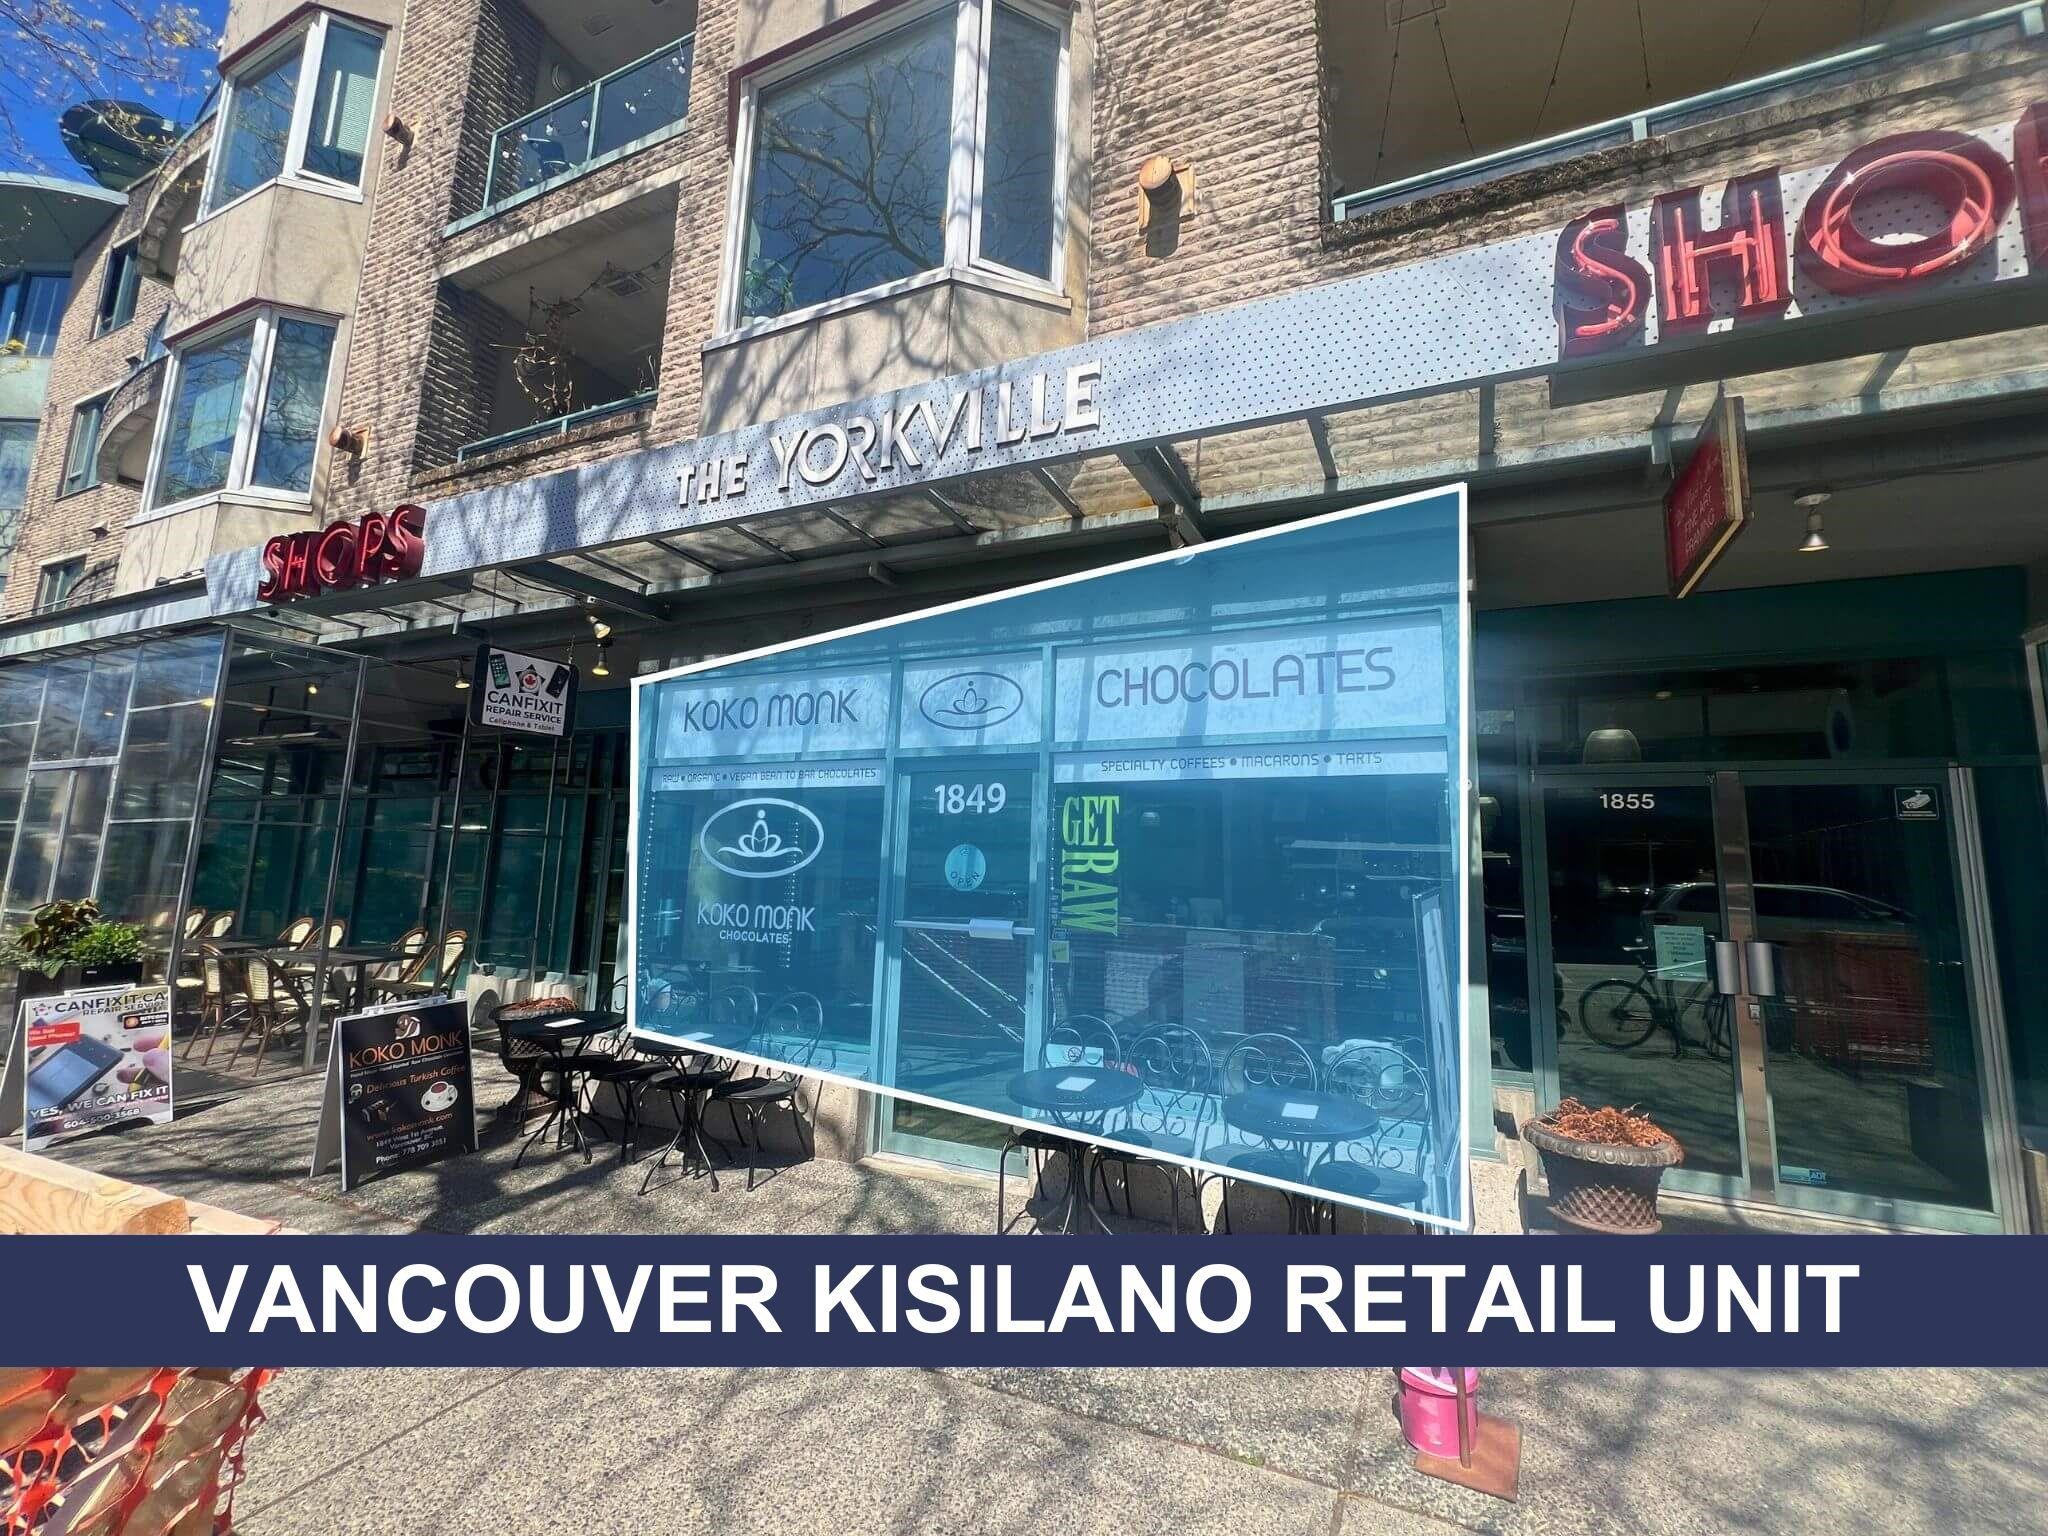 Kitsilano Land Commercial for sale:    (Listed 6800-05-16)